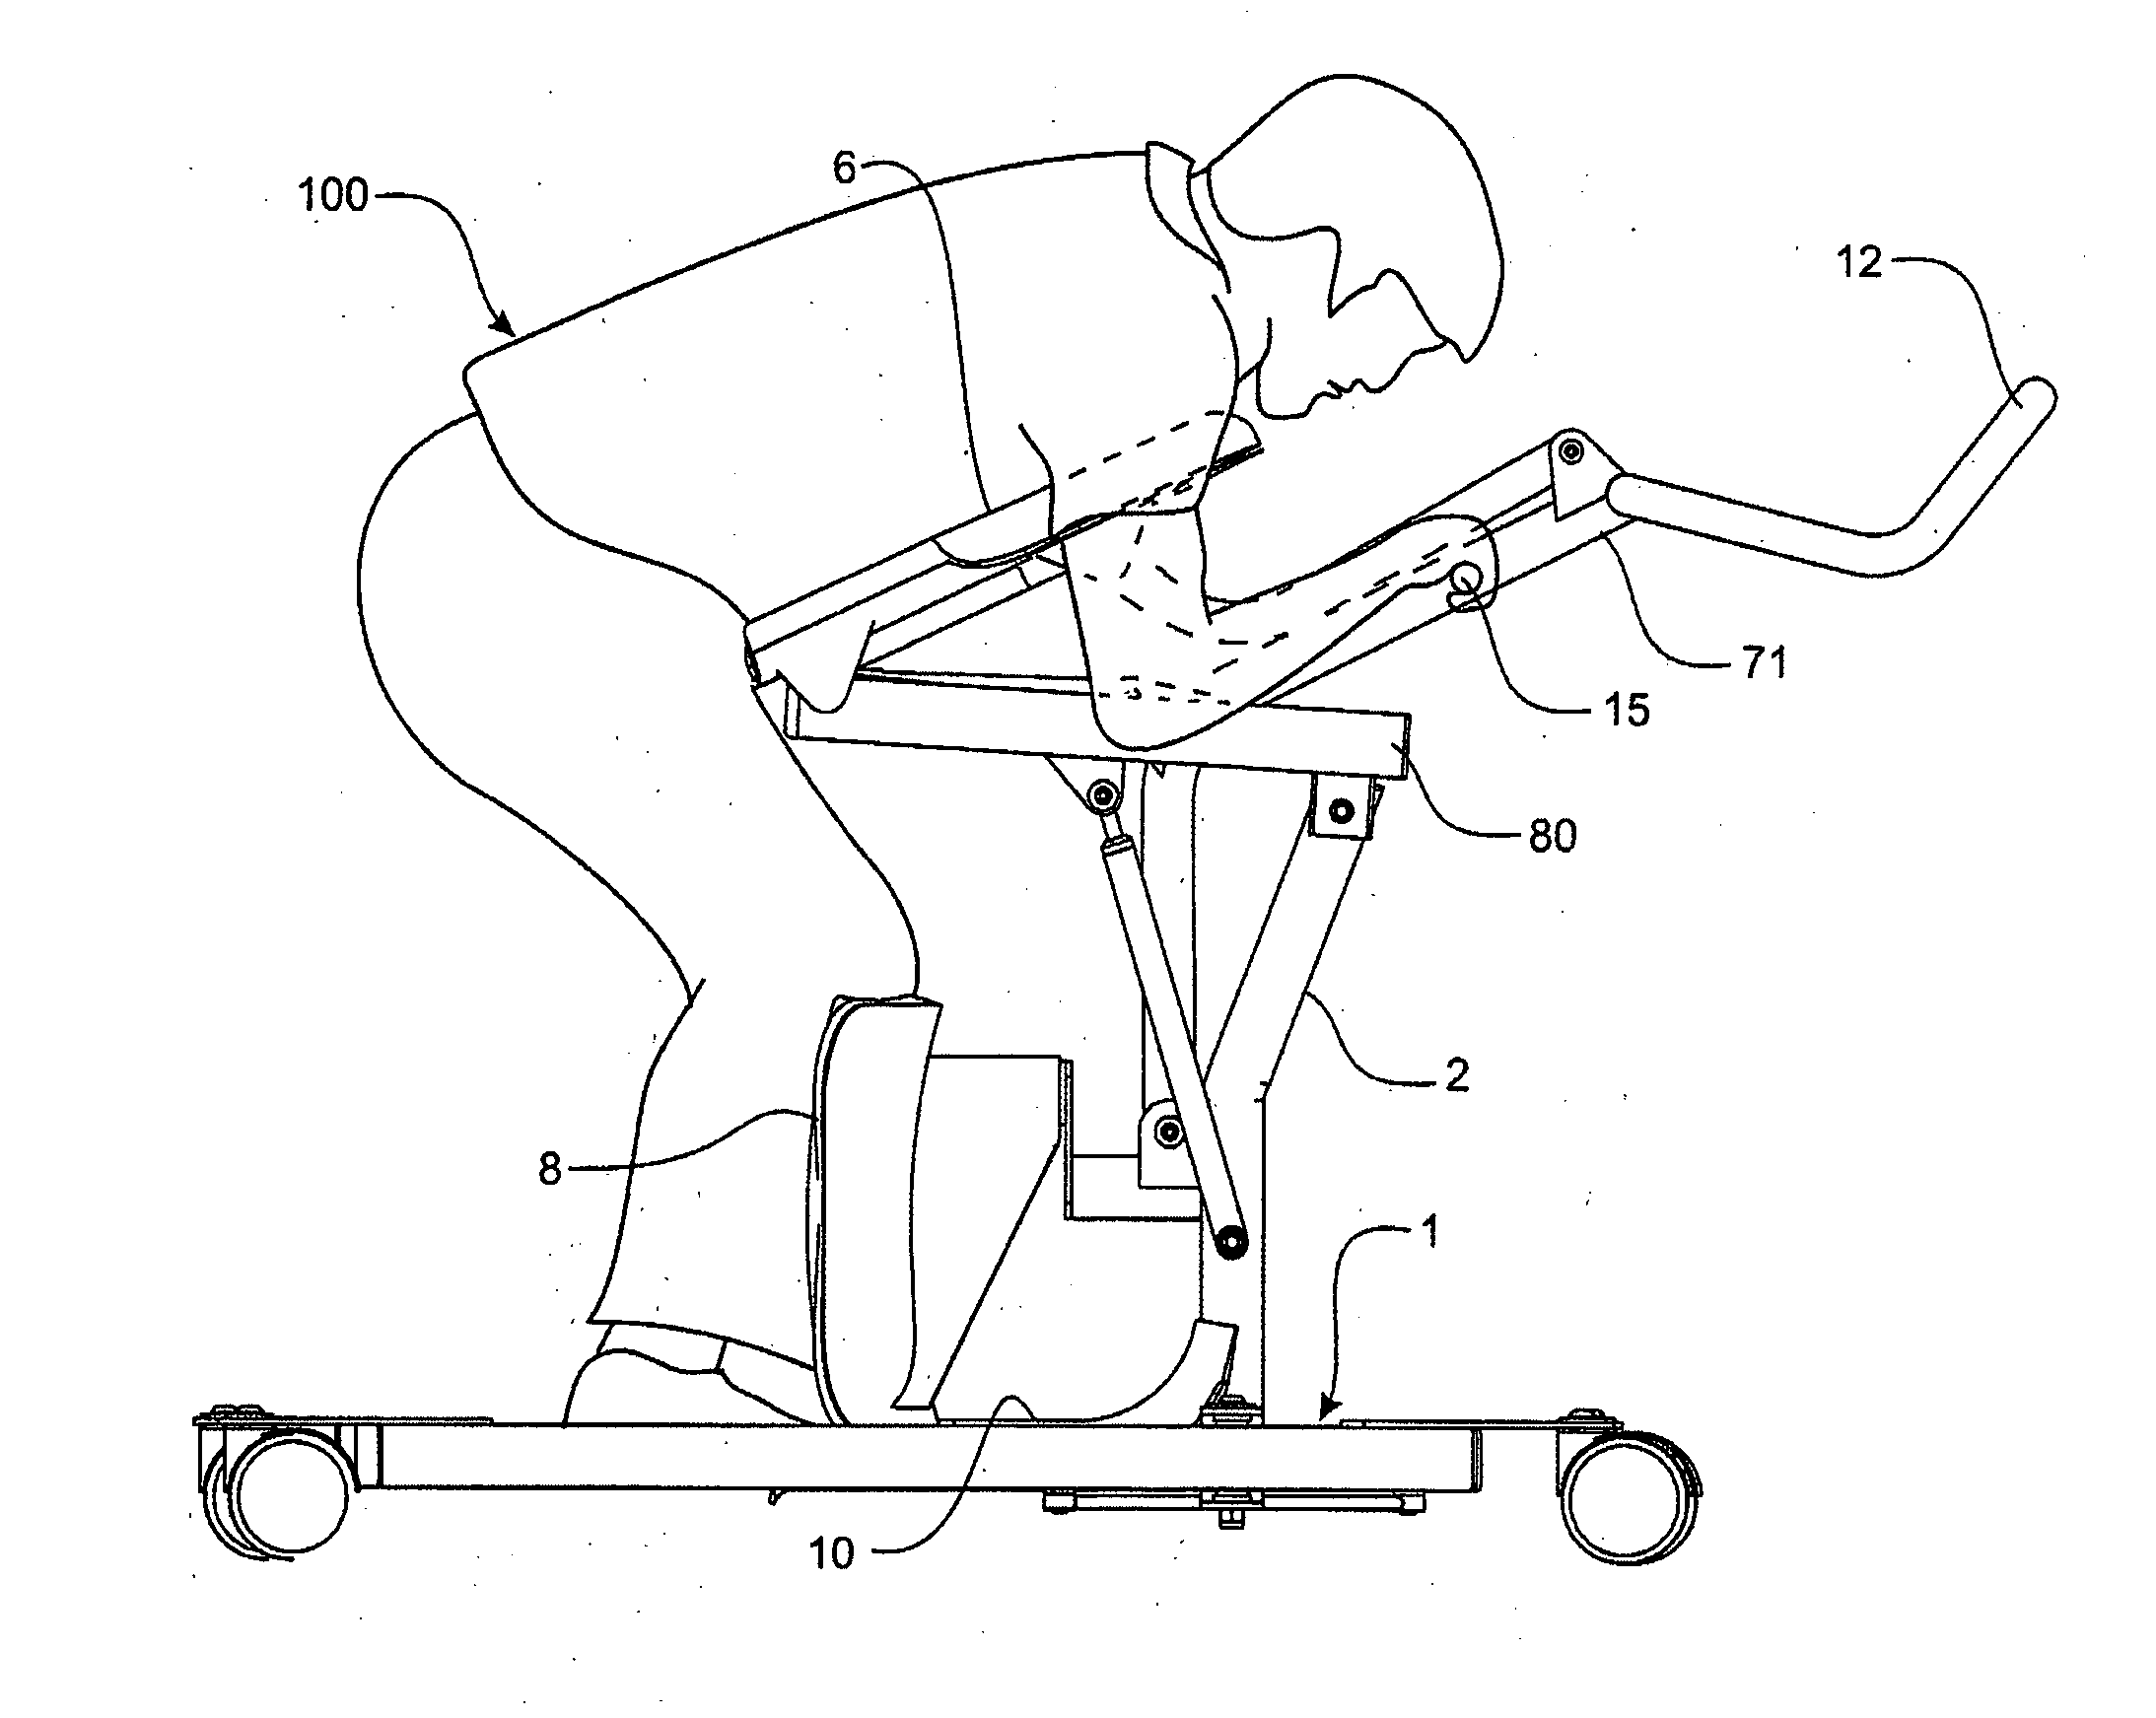 Person Moving Devices For Moving Persons Of Limited Mobility